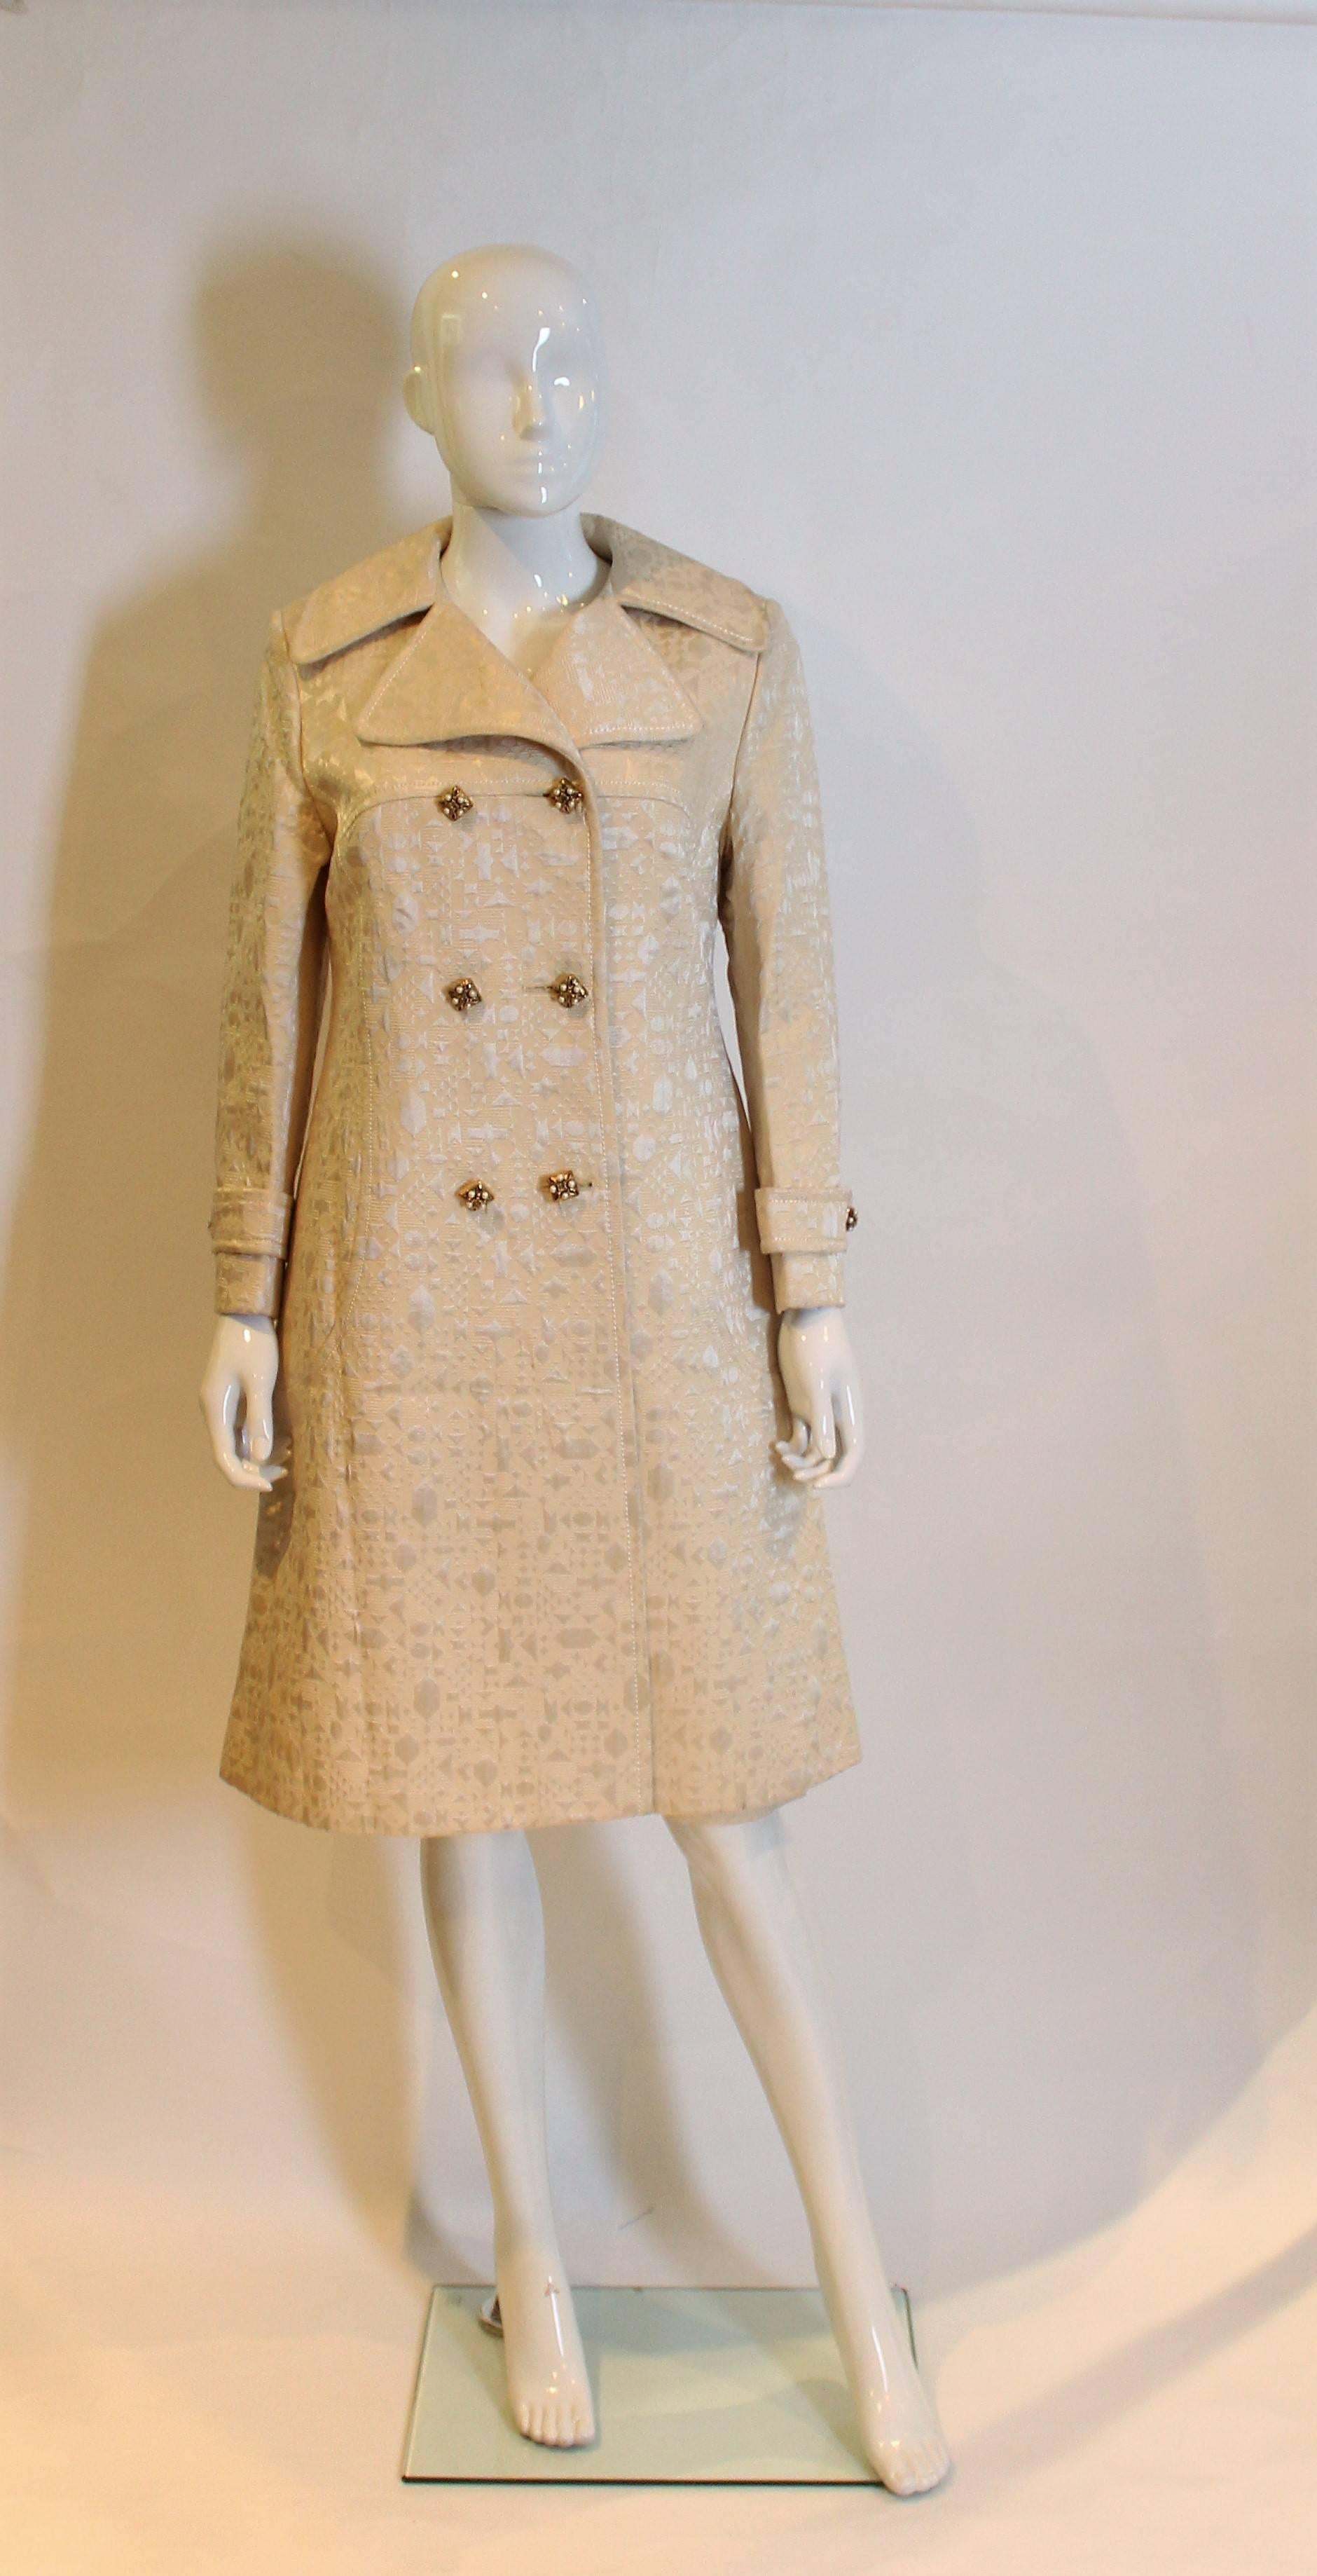 A chic coat by Braucschweig of Switzerland, made for the department store, Browns of Chester.The coat is made of a cream coloured , brocade like fabric with 6 buttons on the front, one on each cuff and a cut away collar.